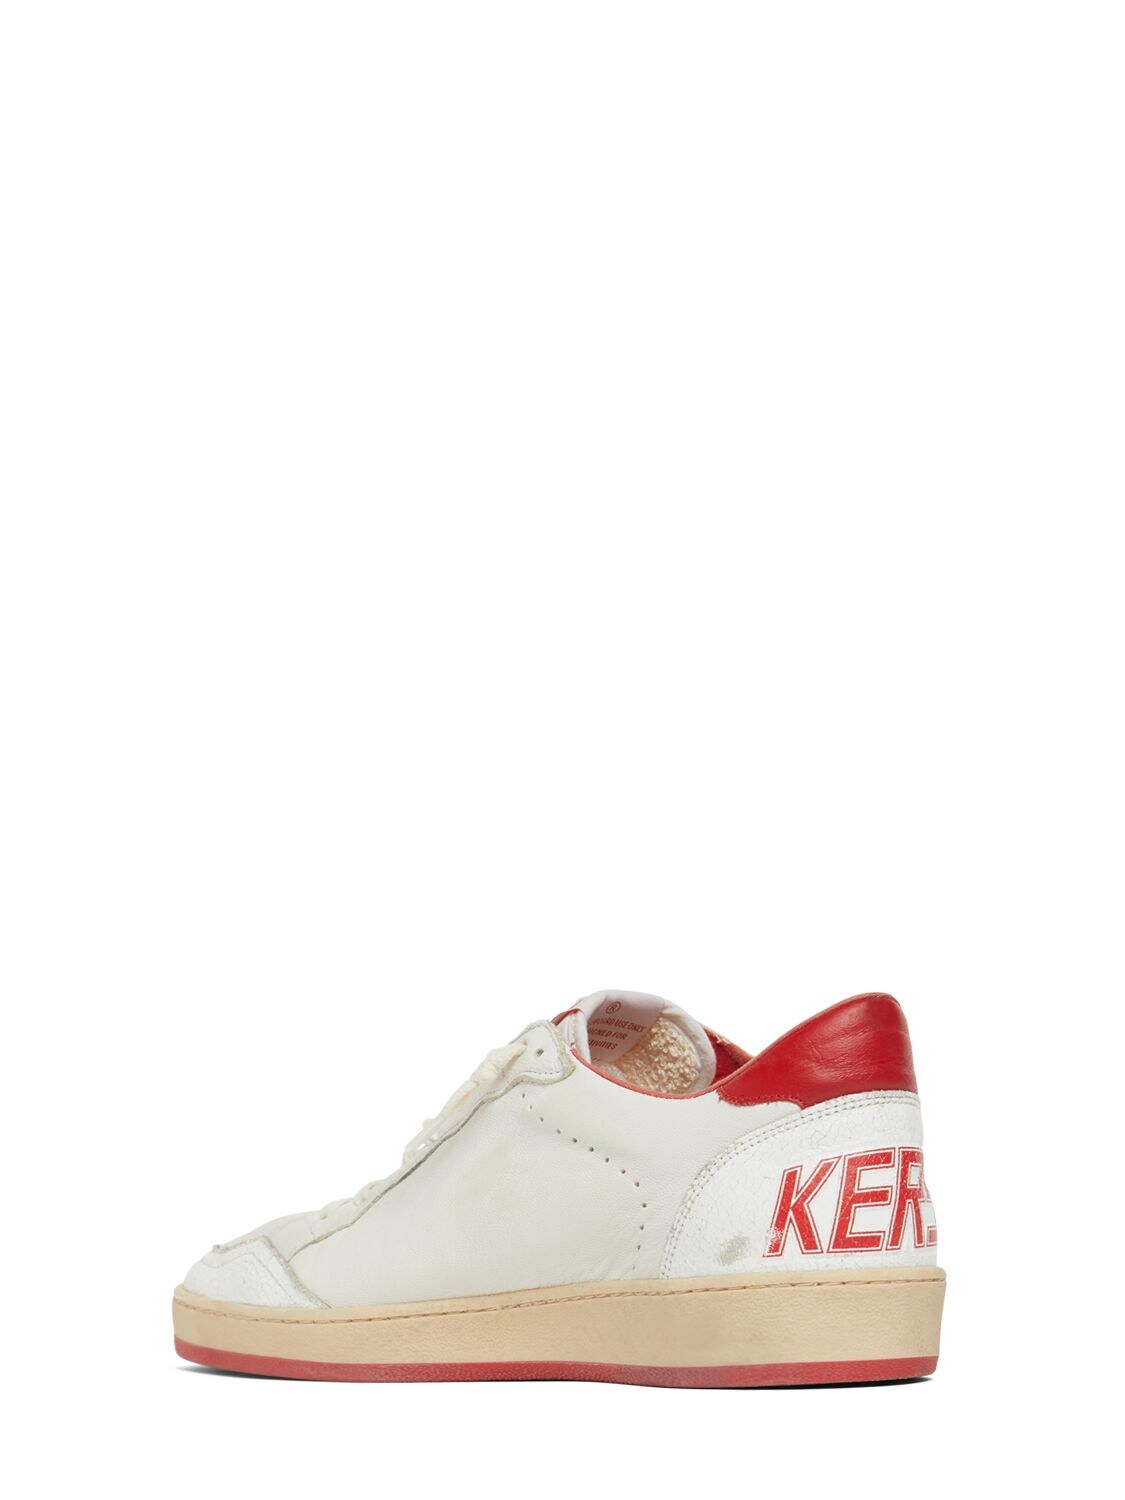 Shop Golden Goose Ball Star Nappa Leather & Nylon Sneakers In White,red